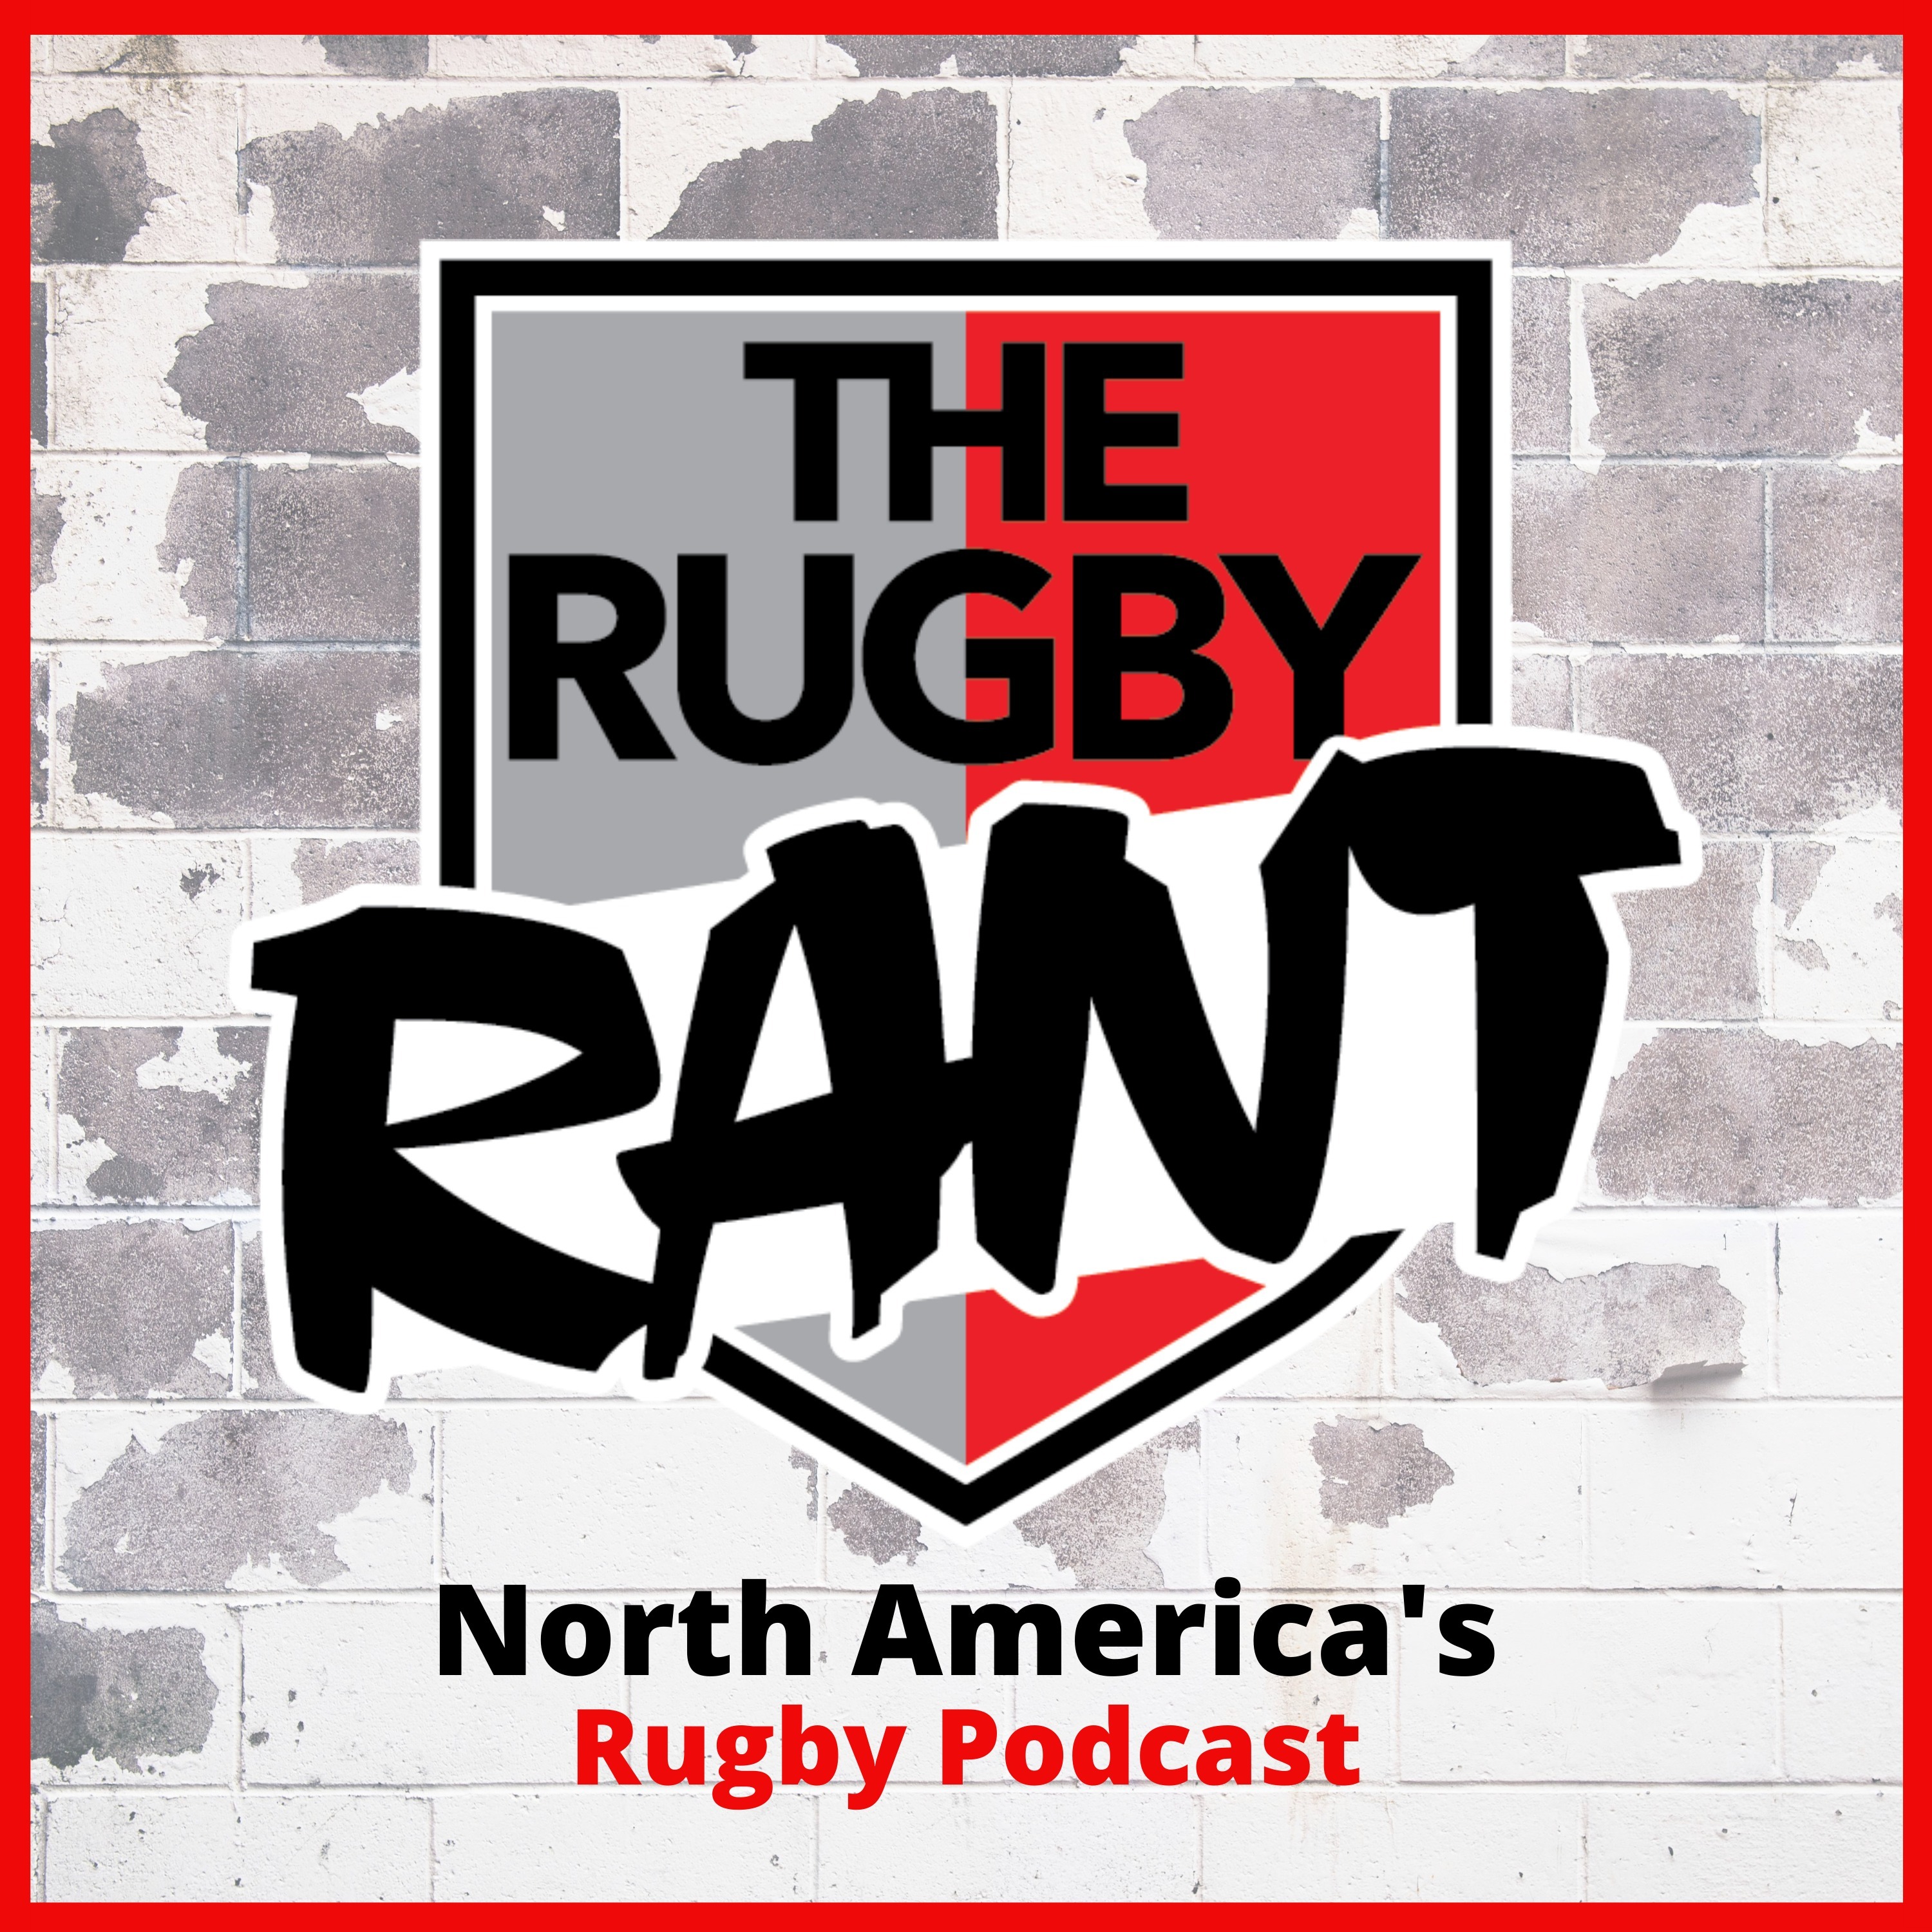 The Rugby Rant - Run, Pass or Kick with Heyneke Meyer